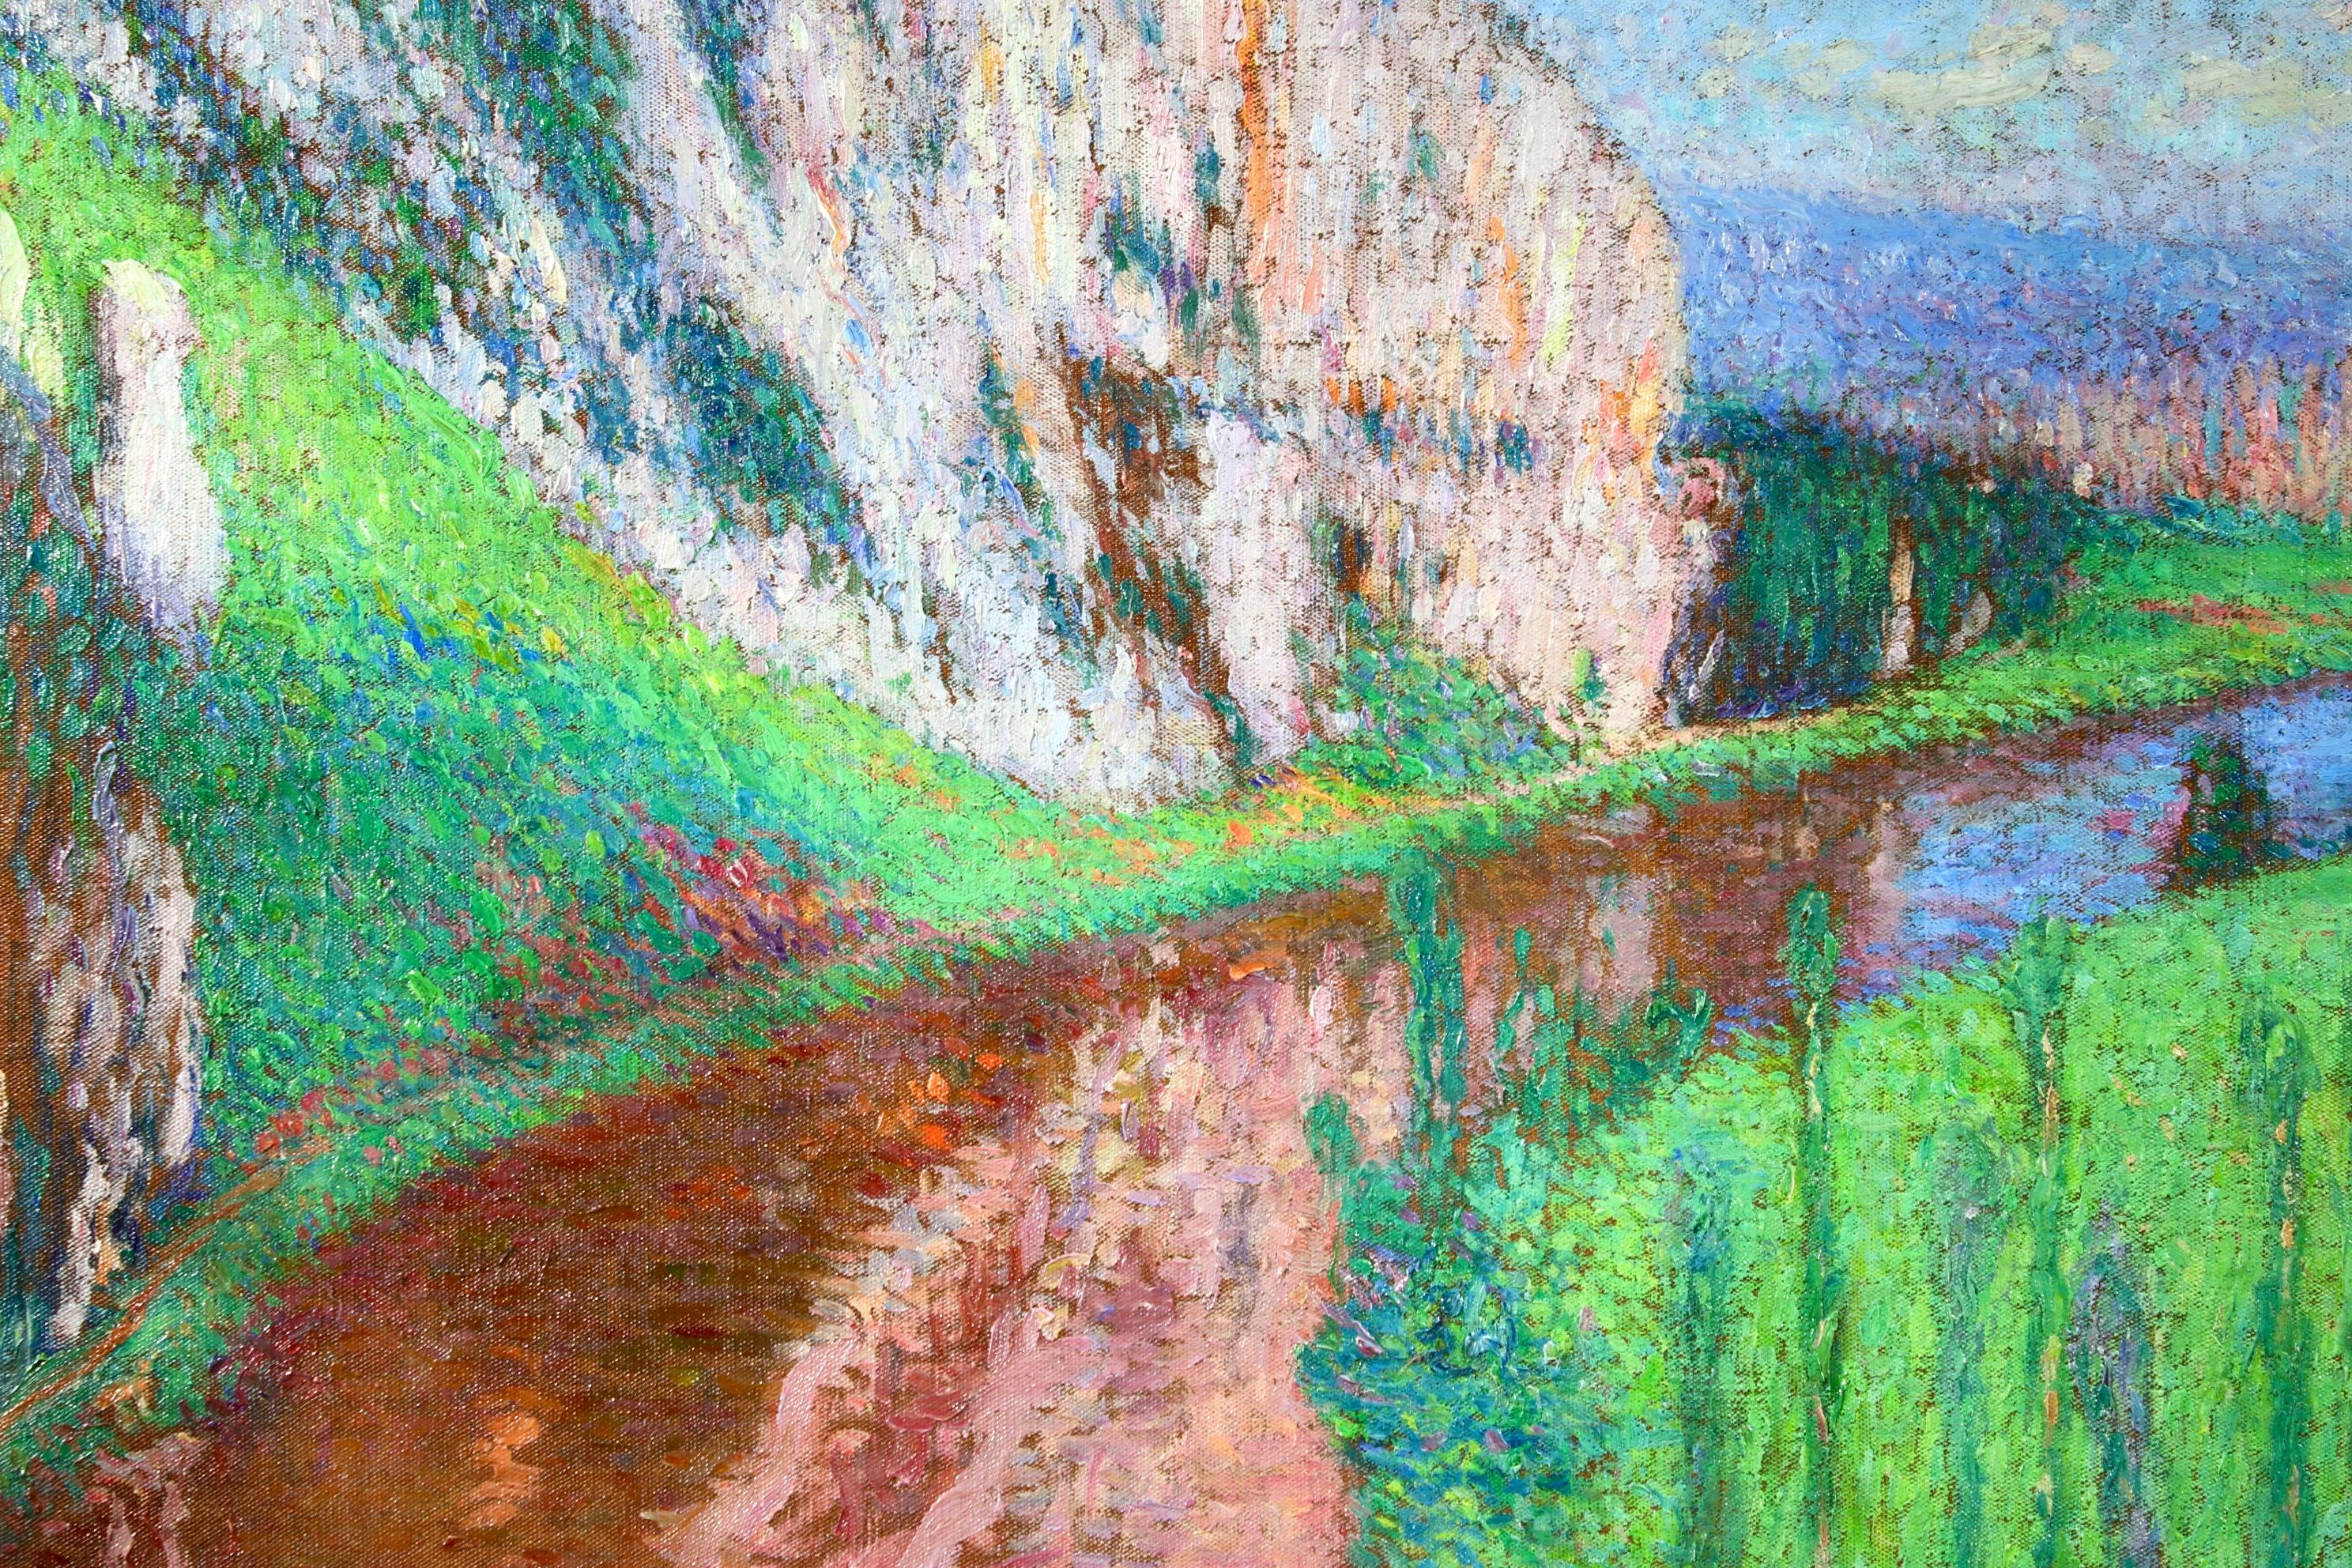 A breathtaking pointillist oil on canvas circa 1930 by Henri Martin depicting a landscape with a river flowing below the Cliffs of Saint Cirq Lapopie in South-West France. Signed lower right.

The authenticity of this work has been confirmed by